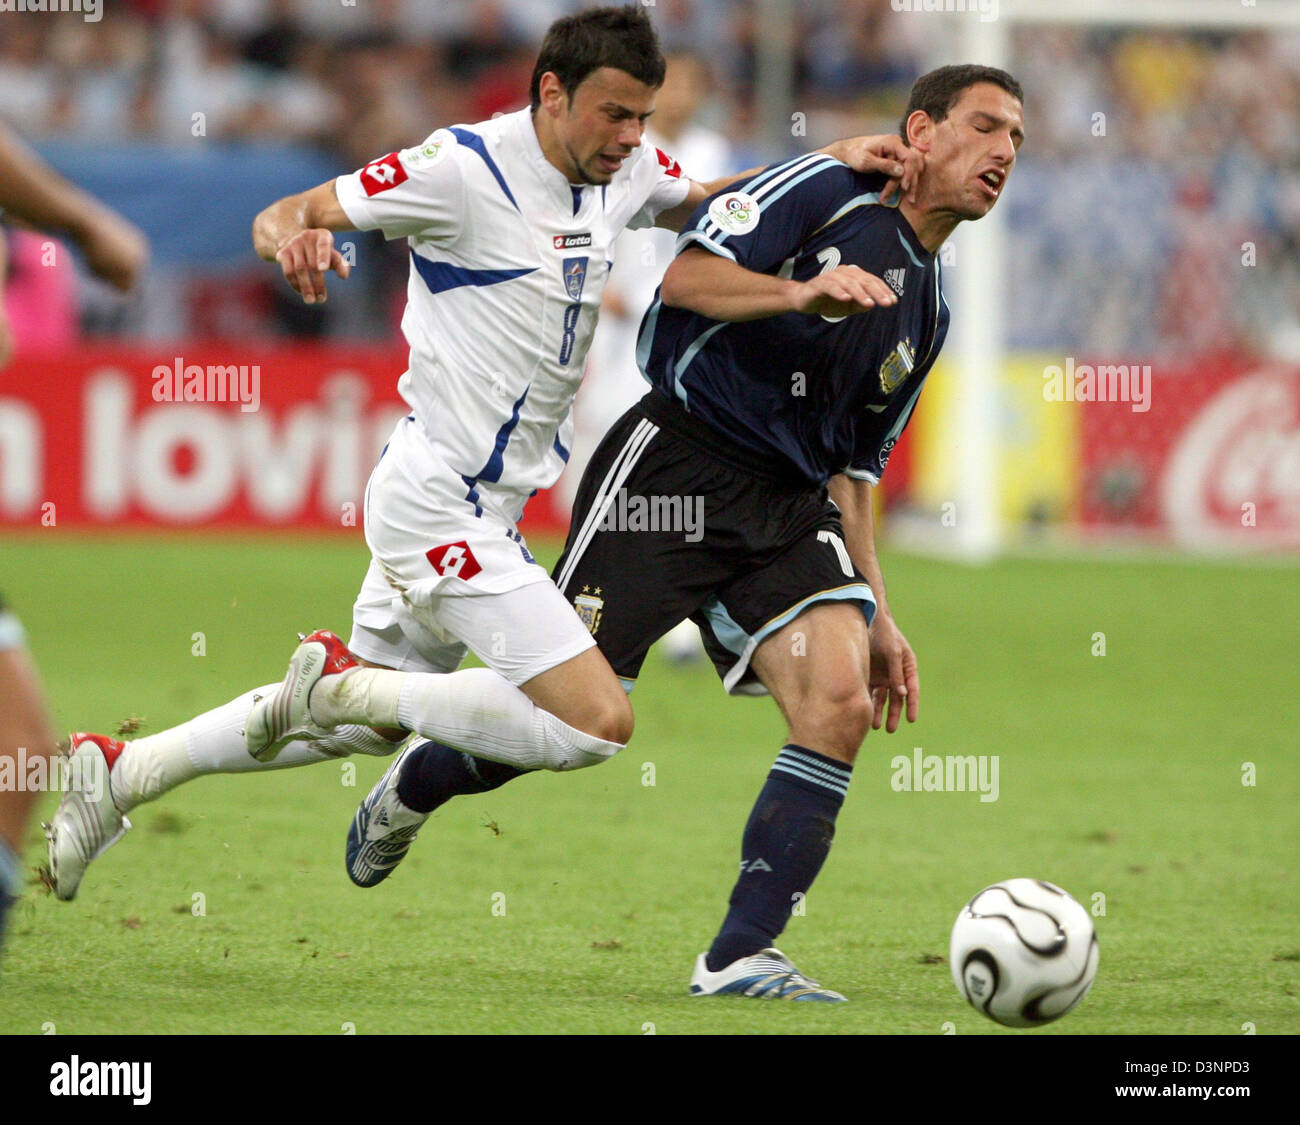 Argentinian player Juan Riquelme (R) is under pressure by Mateja Kezman from Serbia-Montenegro during the 2006 FIFA World Cup group C match of Argentina vs Serbia and Montenegro in Gelsenkirchen, Germany, Friday, 16 June 2006. DPA/ROLAND WEIHRAUCH +++ Mobile Services OUT +++ Please refer to FIFA's Terms and Conditions. +++(c) dpa - Bildfunk+++ Stock Photo